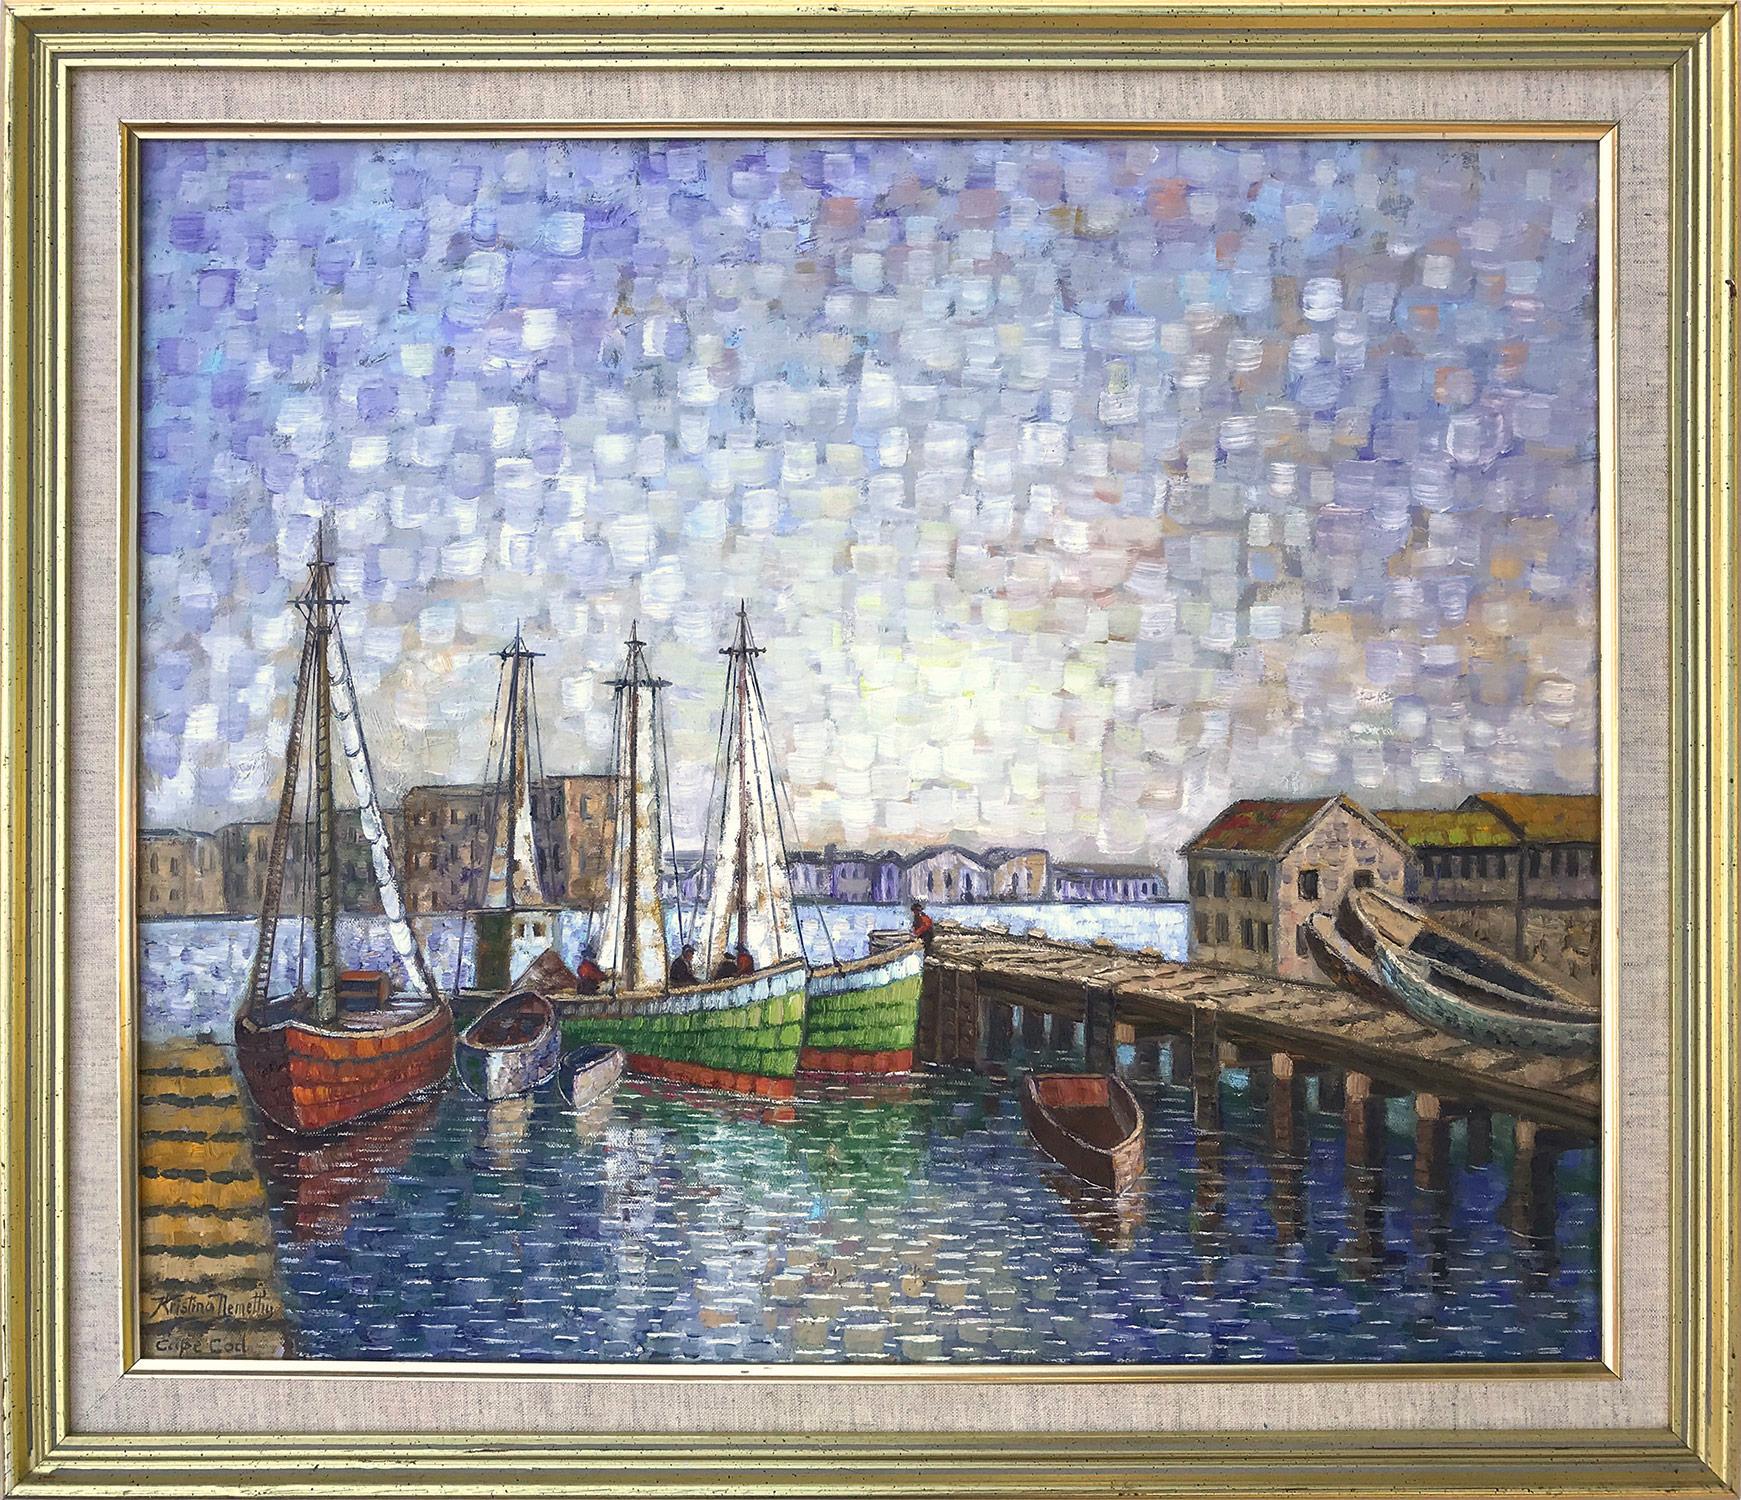 "Cape Cod" American Impressionist Oil Painting on Canvas of Boats On the Docks